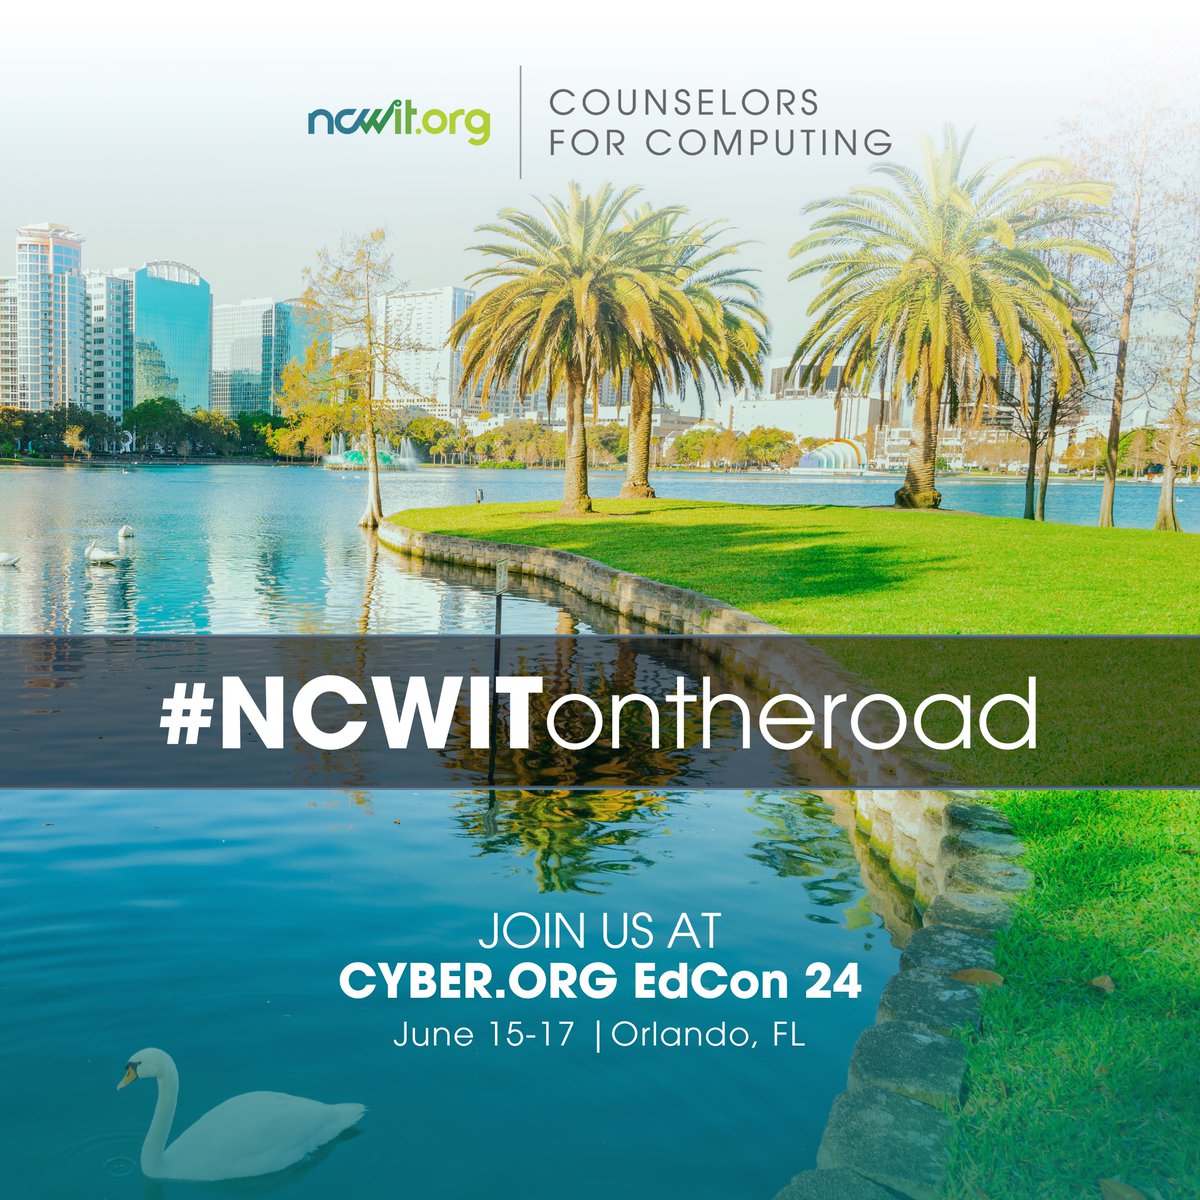 📣 Calling all counselors! Join #NCWITontheroad at @cyber_dot_org EdCon 24 and gain insights on training and diversifying the next generation of cyber professionals!

Check out the #NCWITC4C counselor-focused track:  ncwit.org/event/ncwitc4c…

Register here: bit.ly/cyberedcon24